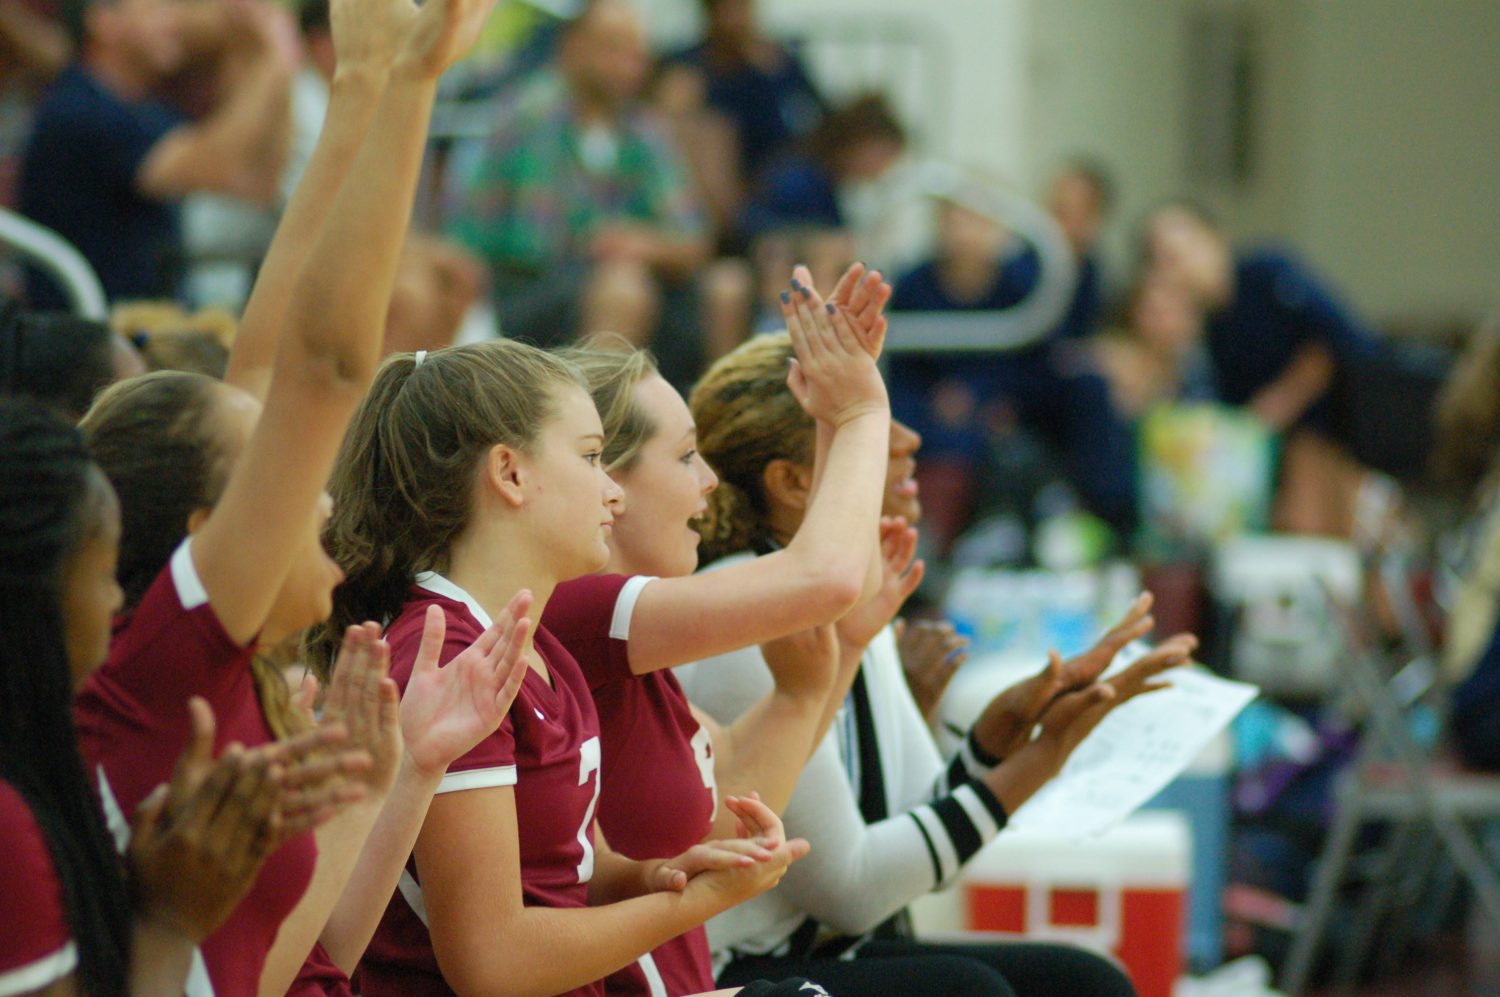 The+junior+varsity+volleyball+team+cheers+on+their+teammates+during+a+match+against+Decatur+High+School.